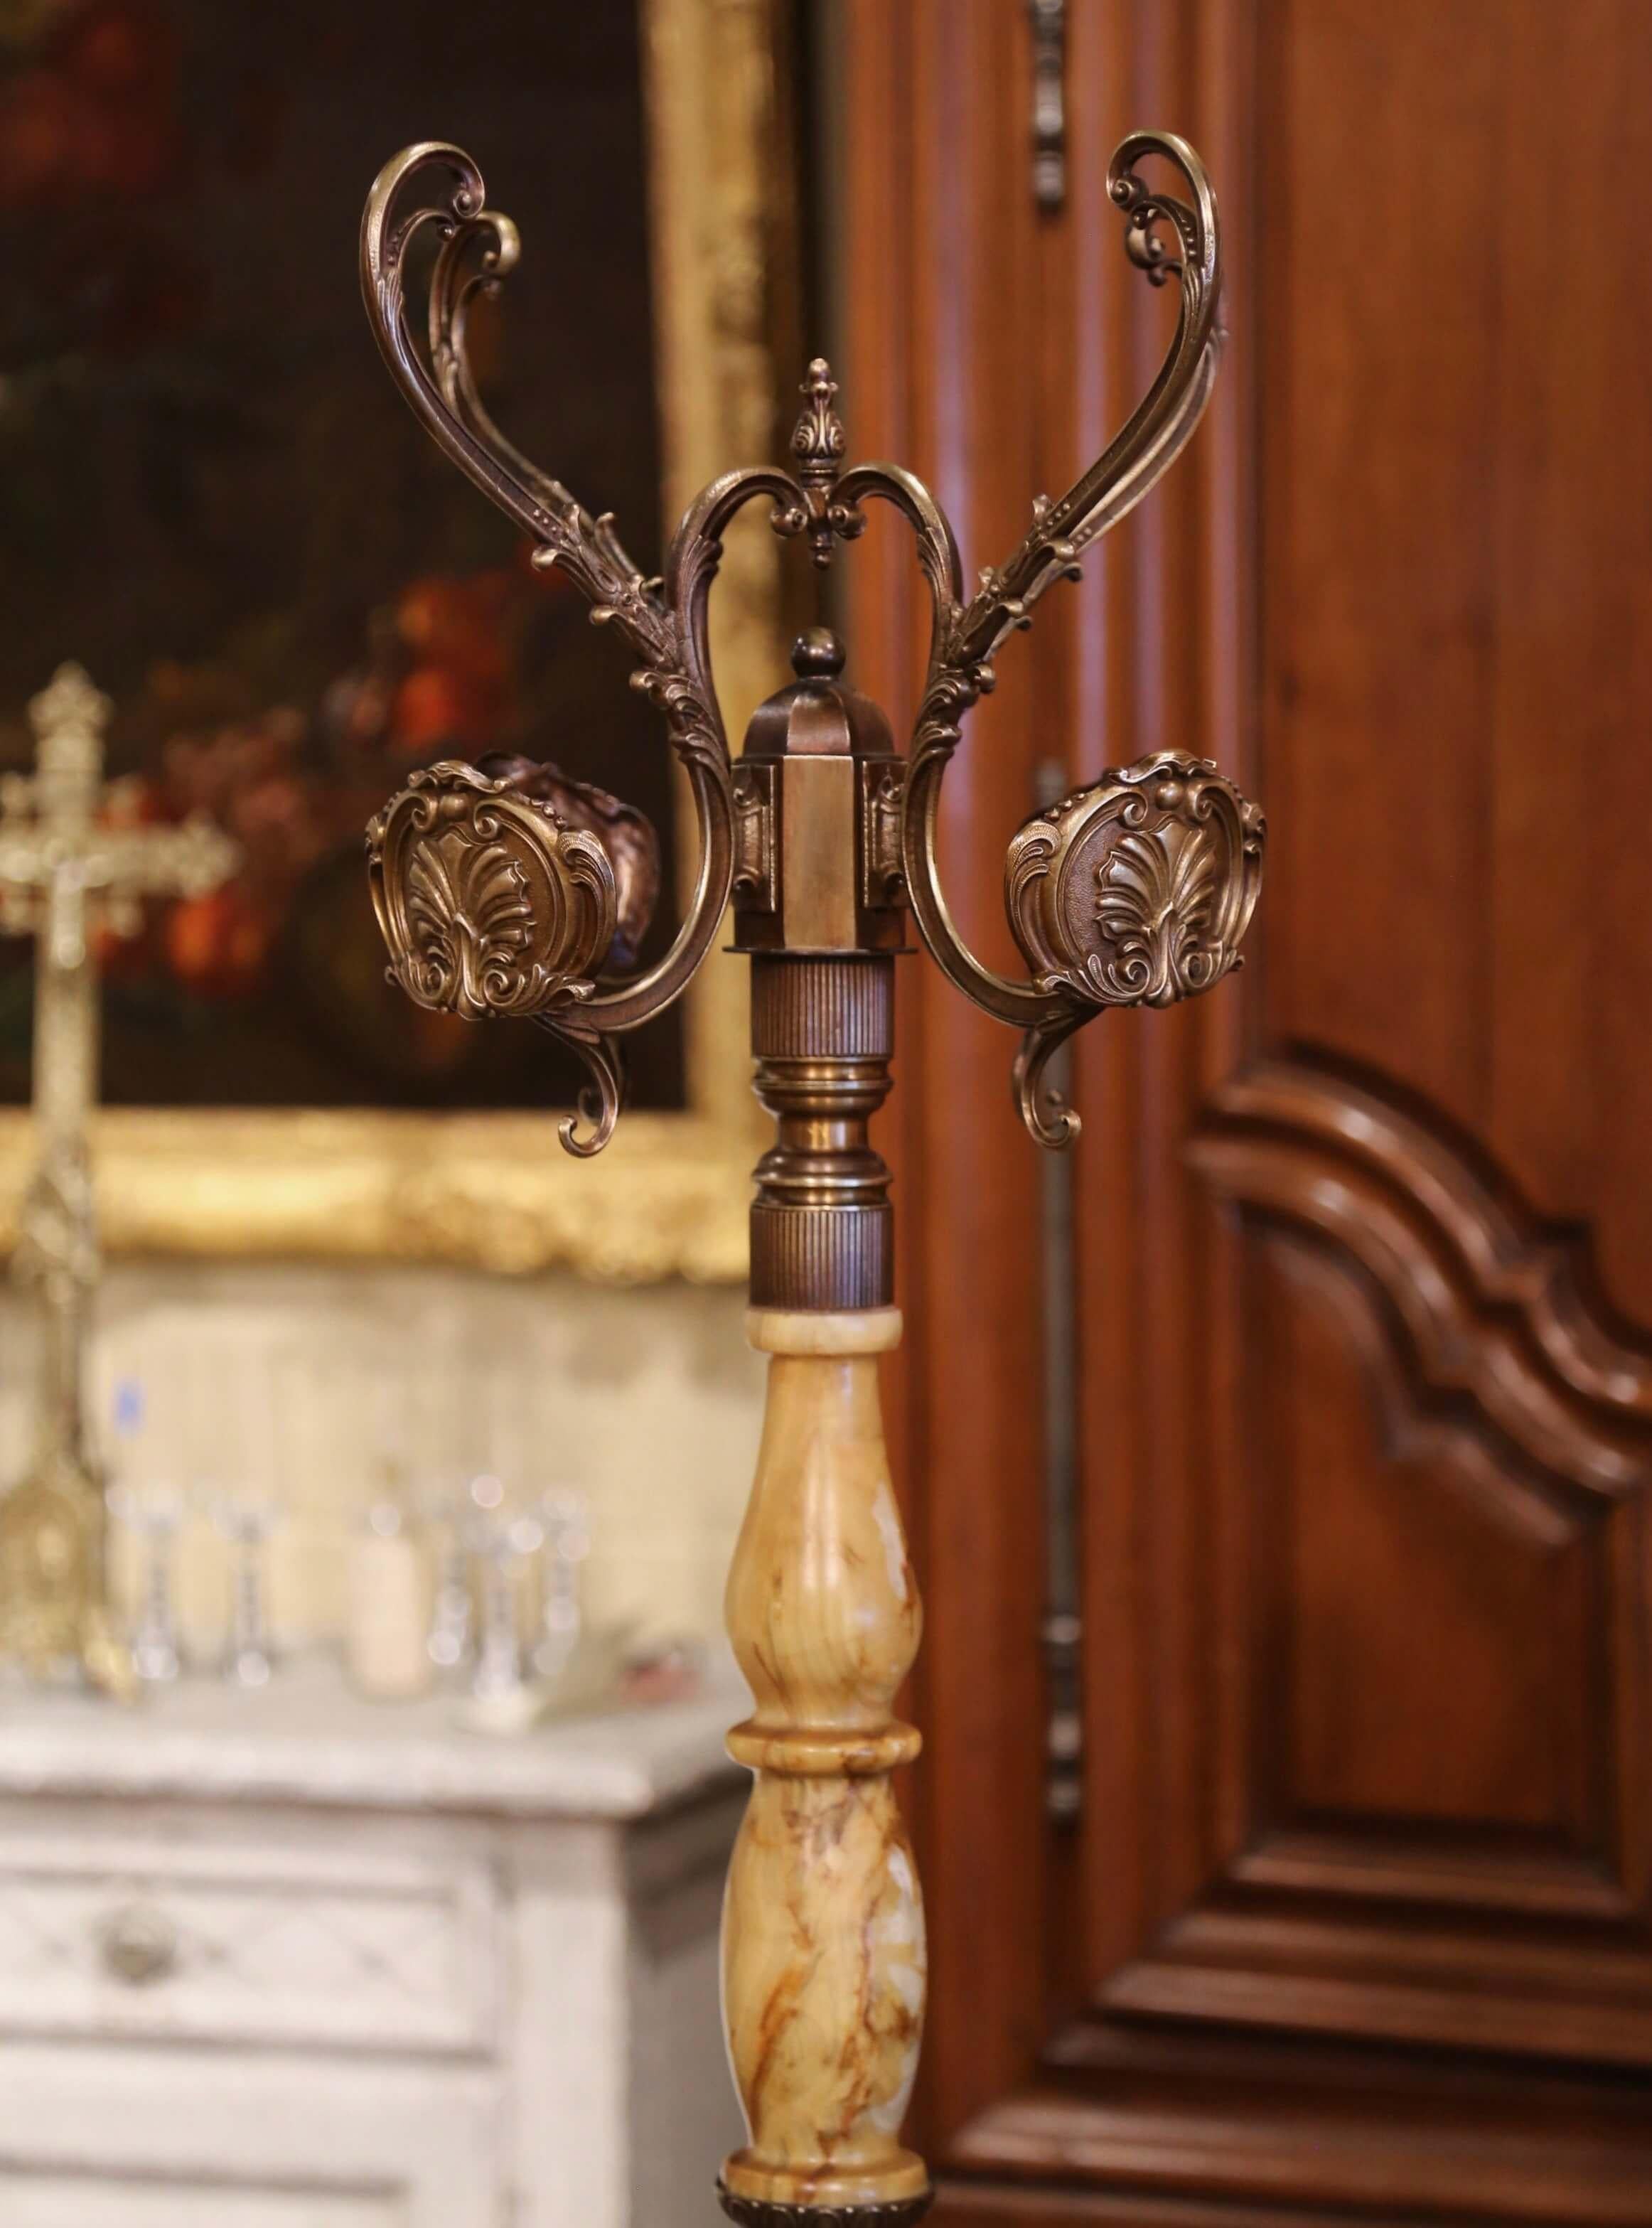 This antique carved onyx and brass hall tree was crafted in France, circa 1920. Standing on an intricate vasiform base ending in quadri-partite feet with dolphin form and acanthus leaf motifs, the tall rack features a turned spiral central onyx stem